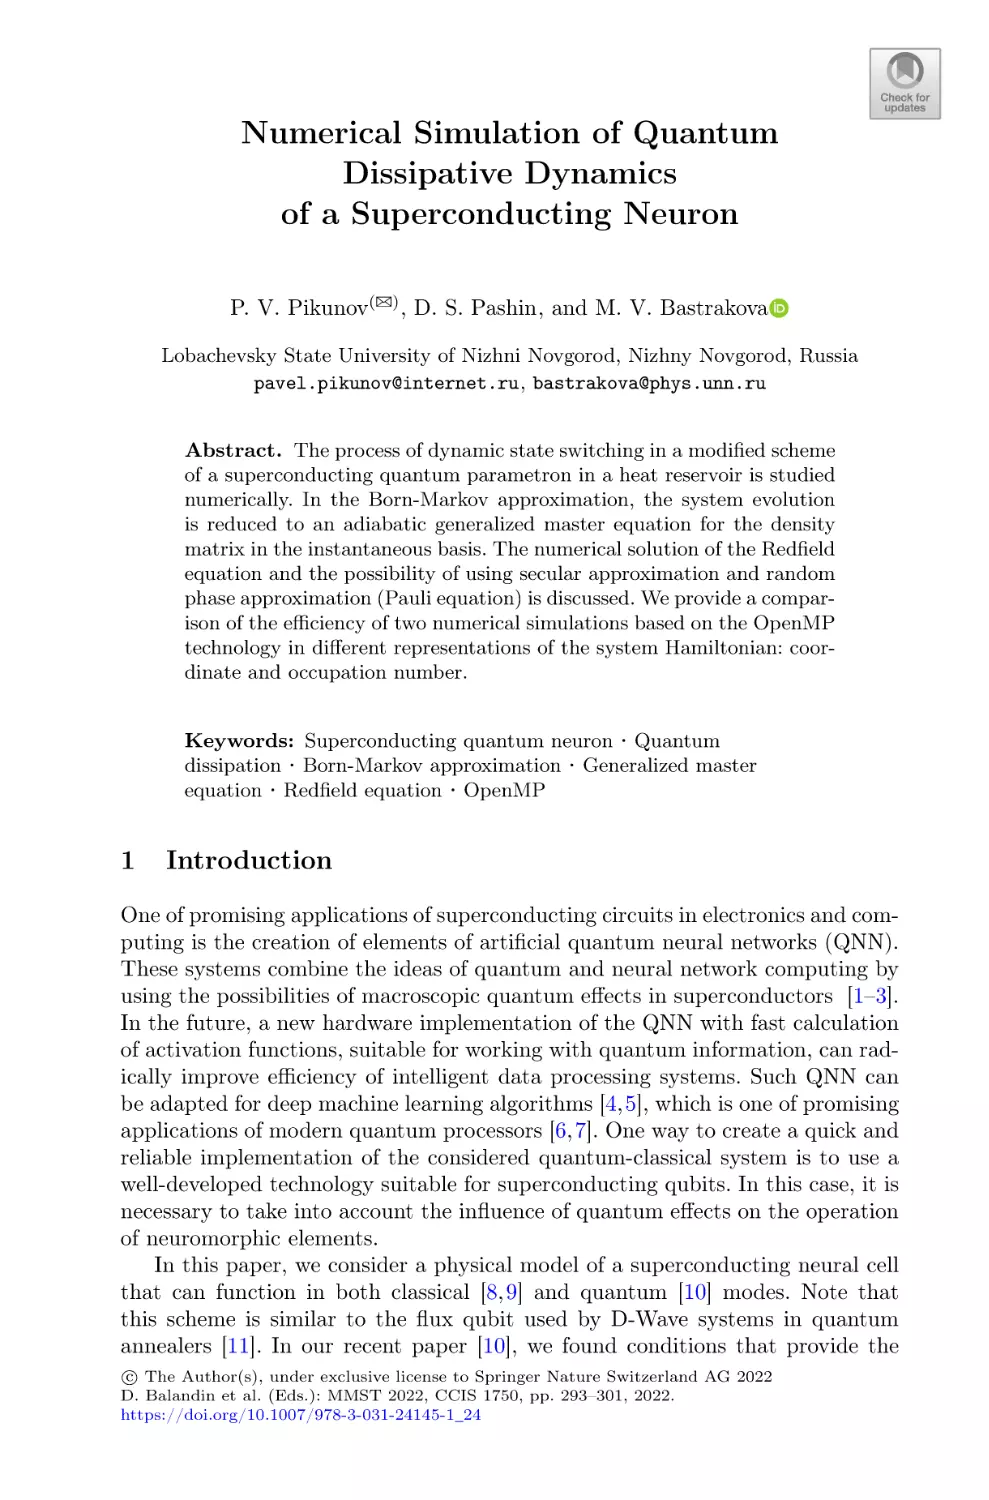 Numerical Simulation of Quantum Dissipative Dynamics of a Superconducting Neuron
1 Introduction